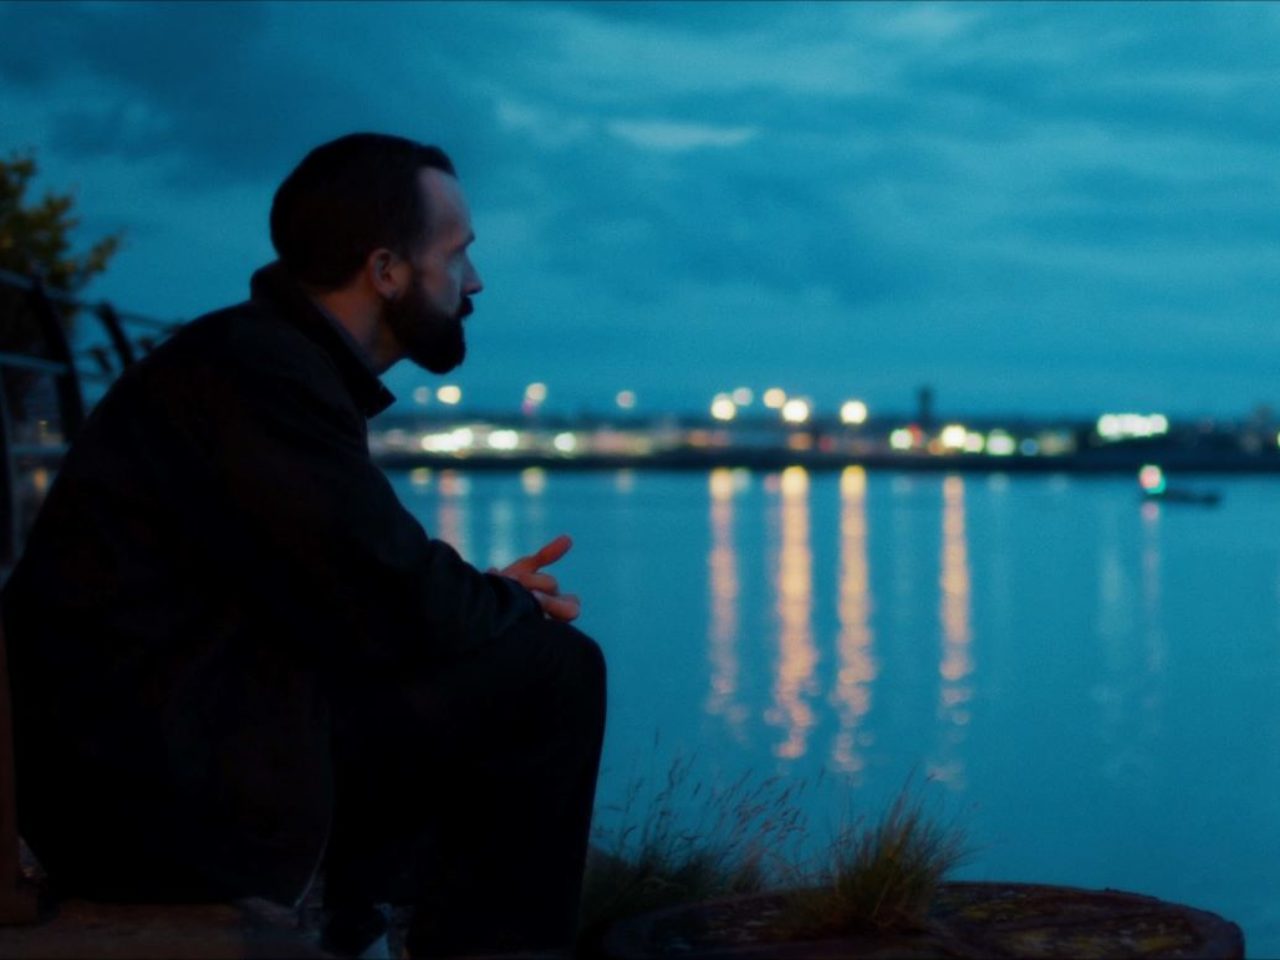 A film still. The actor is sat on the side, looking out to a lake, it is starting to go dark.